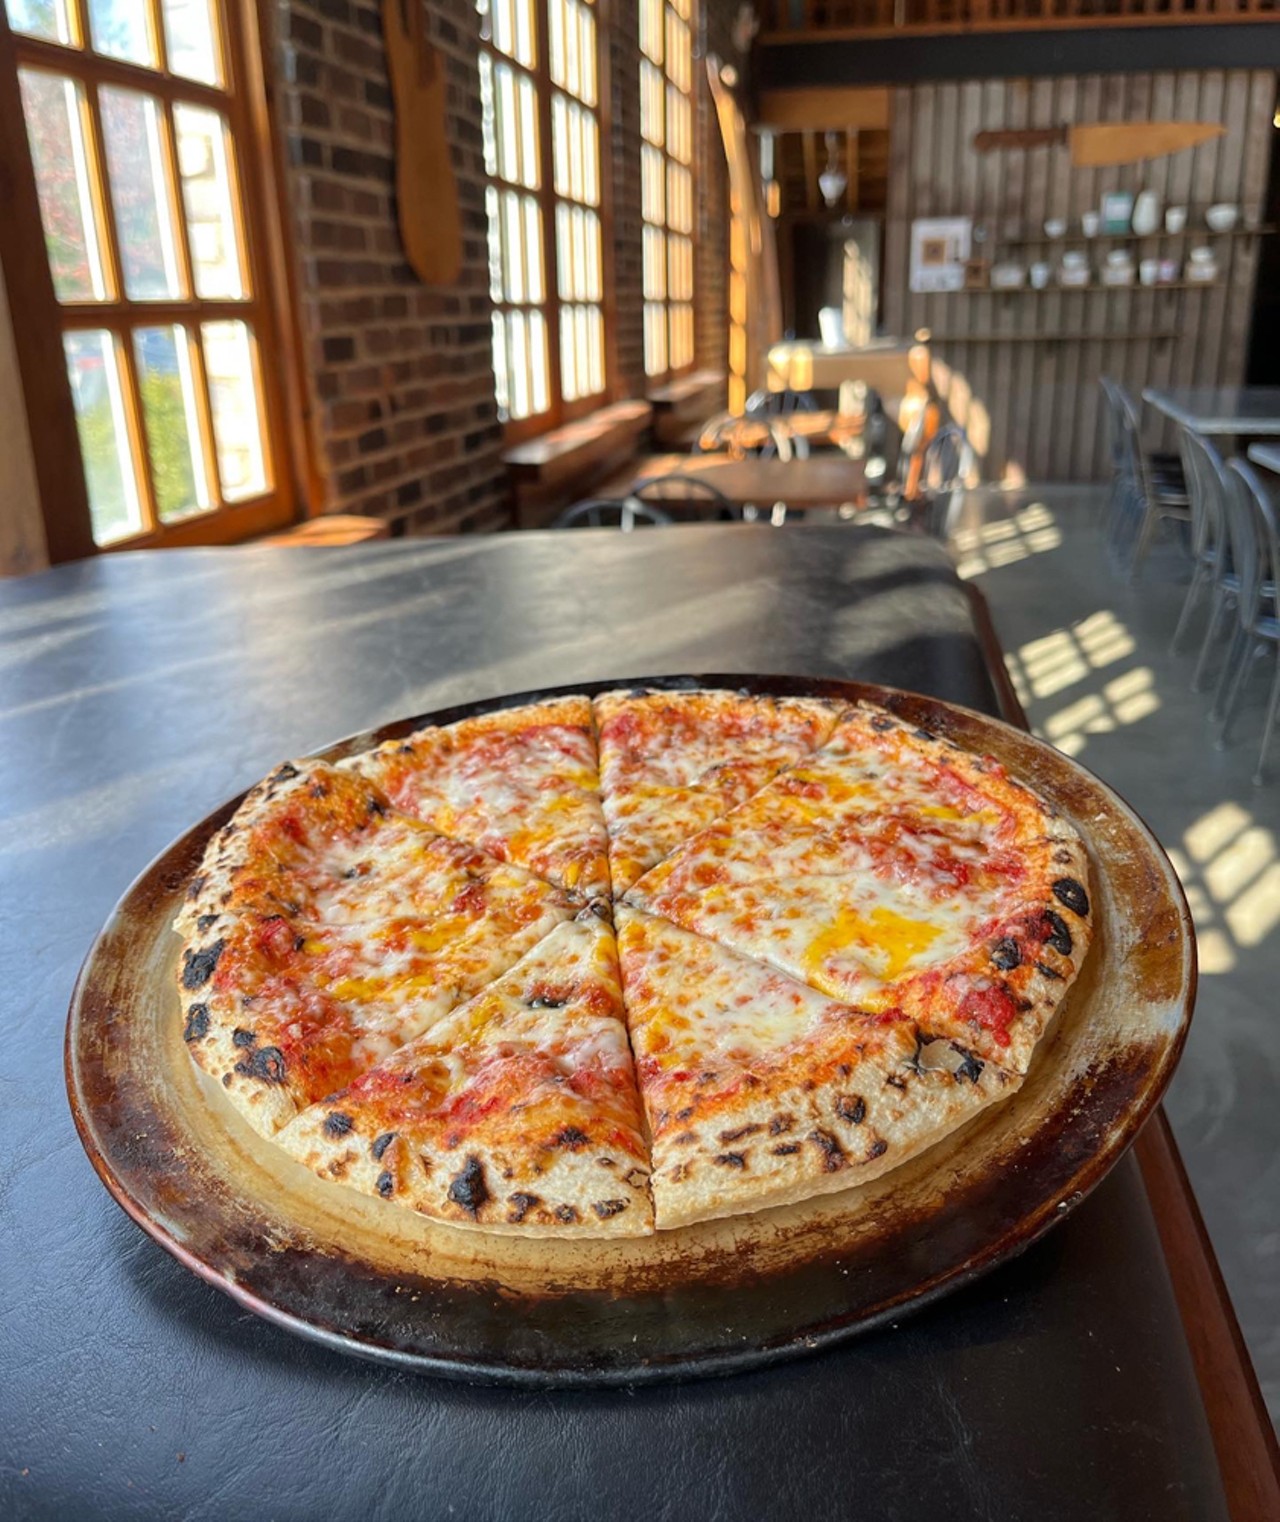  MozzaPi 
12102 La Grange Rd., 1020 E Washington St., 2200 Bardstown Rd.
10? MozzaPi Cheese Pizza 
Louisville&#146;s Best Cheese Pizza &#150; 10? pizza with house made red sauce, east coast blend shredded mozzarella, light cheddar. Barstool Sports rated and approved!